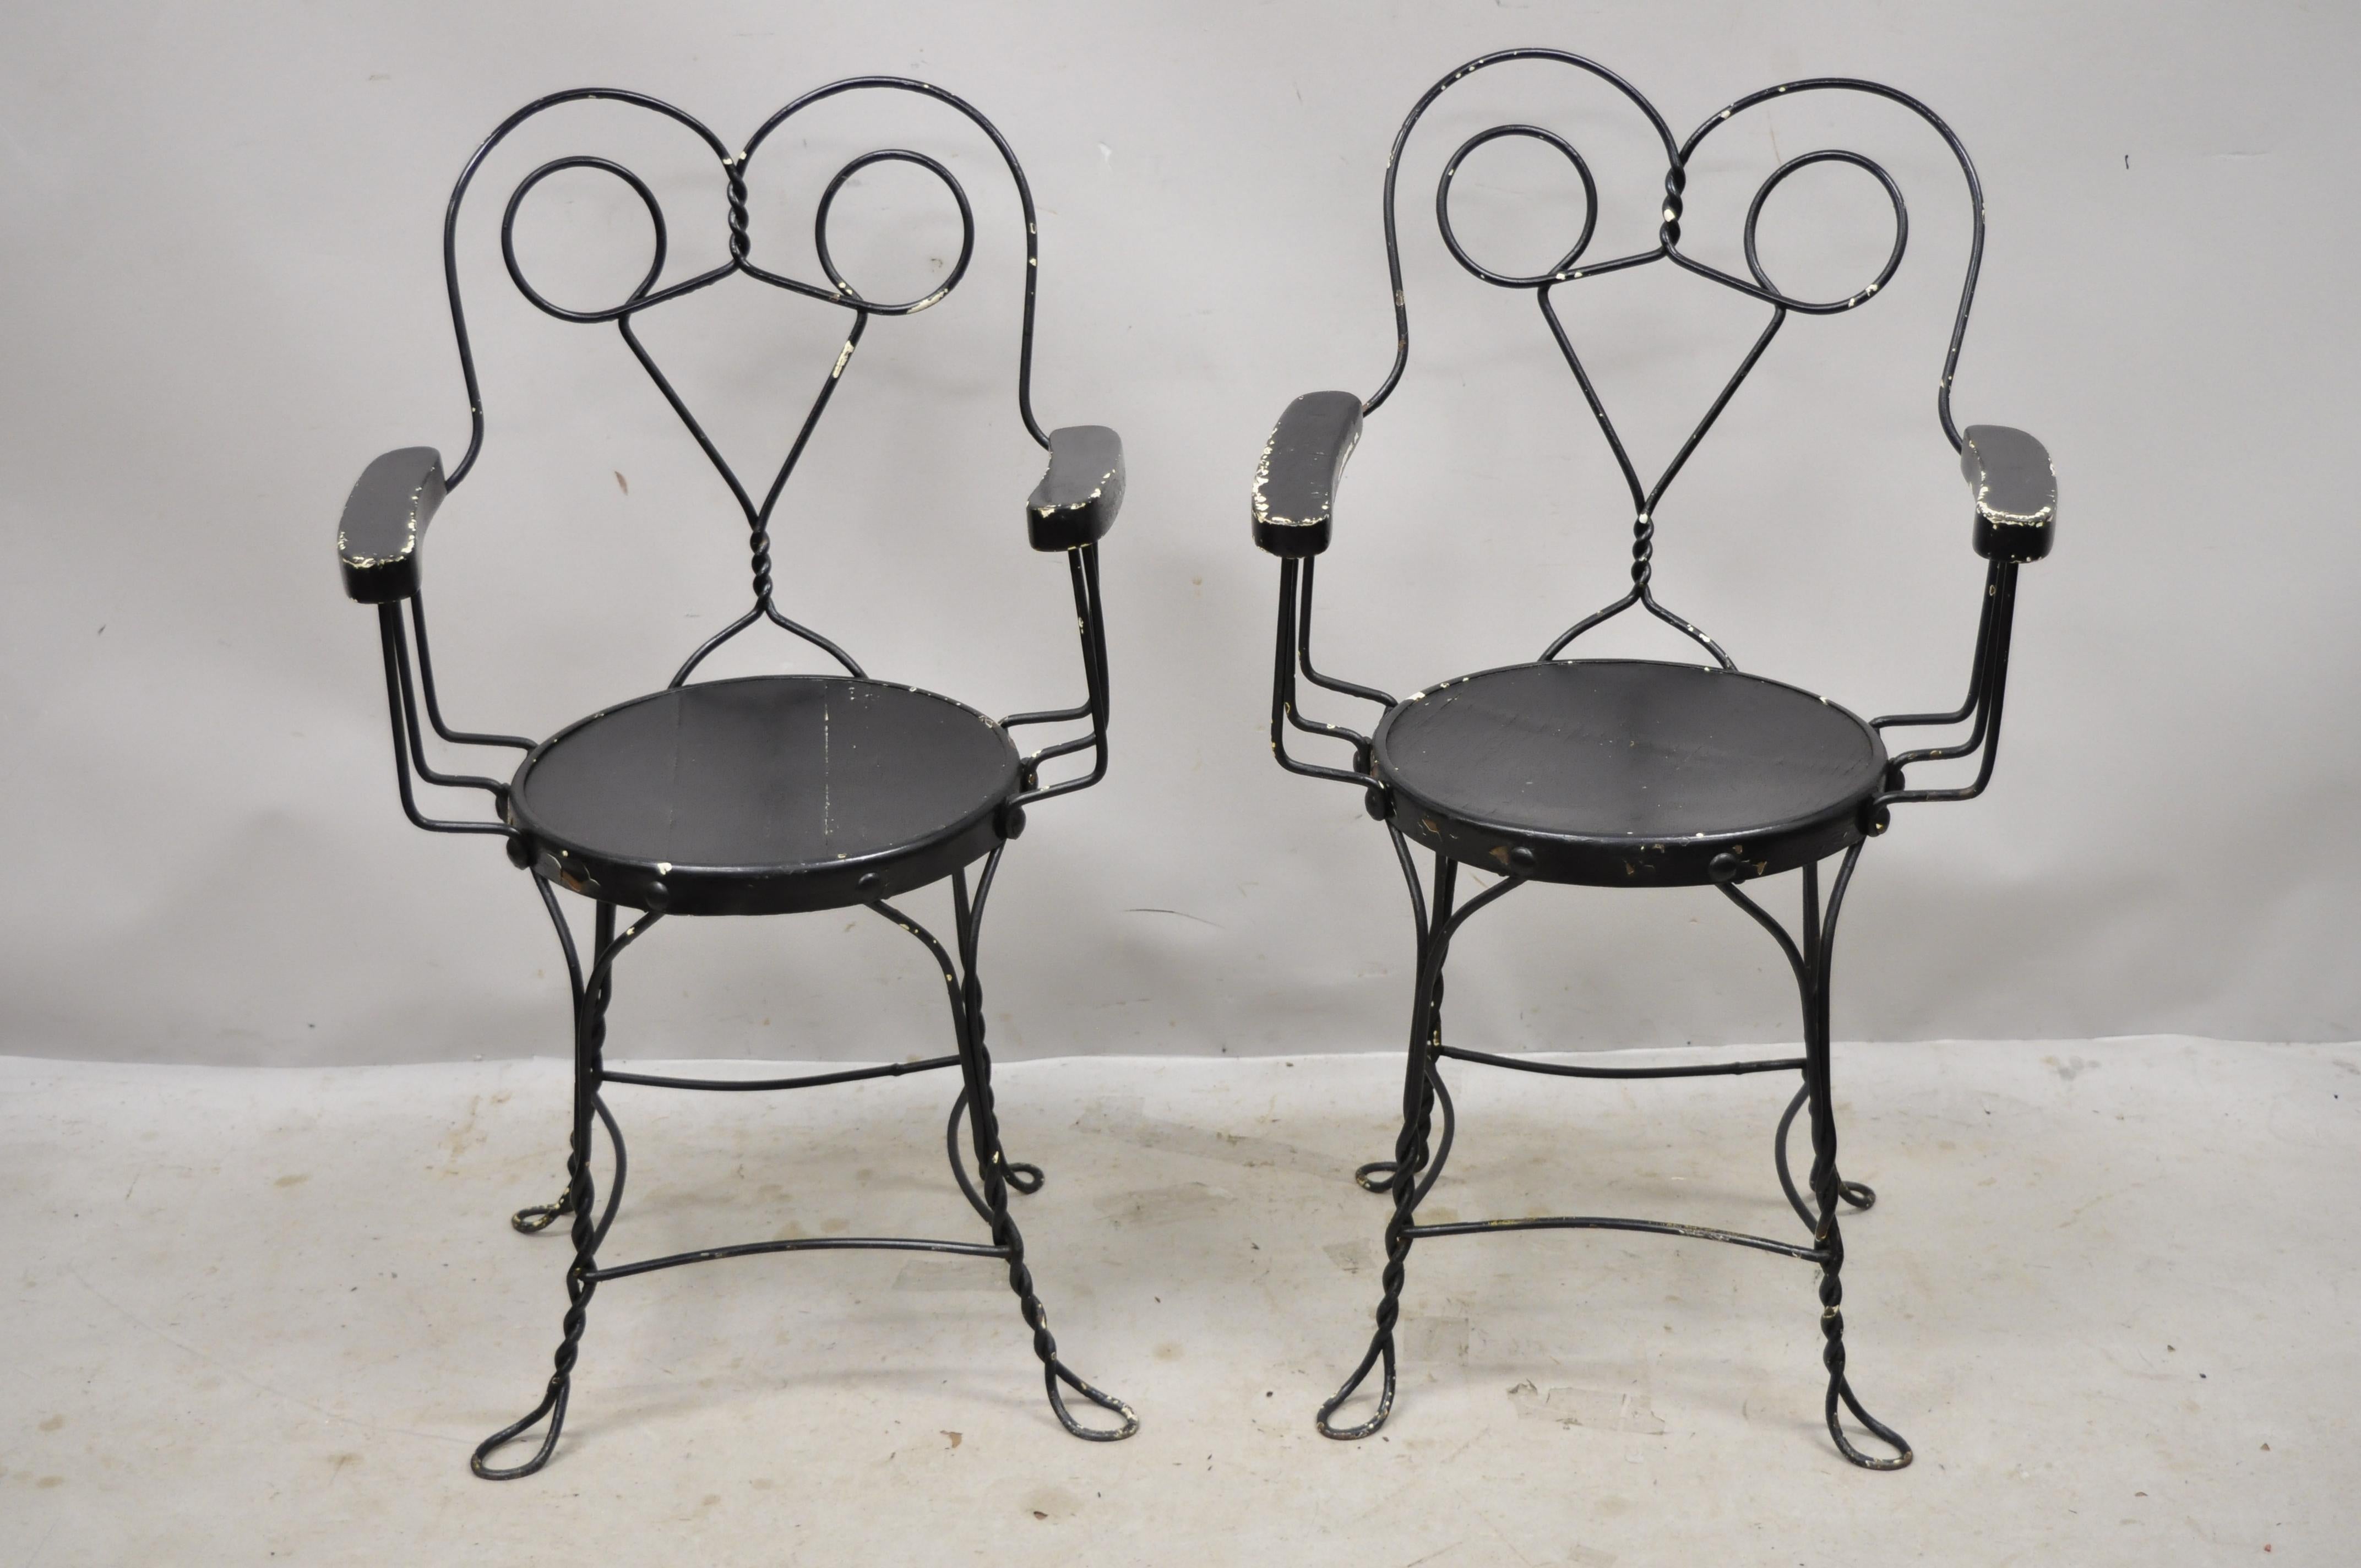 Antique wrought iron twisted metal ice cream parlor arm chairs with wood arms - pair B. Item features wooden armrests, wooden round seat, twisted metal frame, metal frames, very nice antique pair. Circa Early 1900s. Measurements: 35